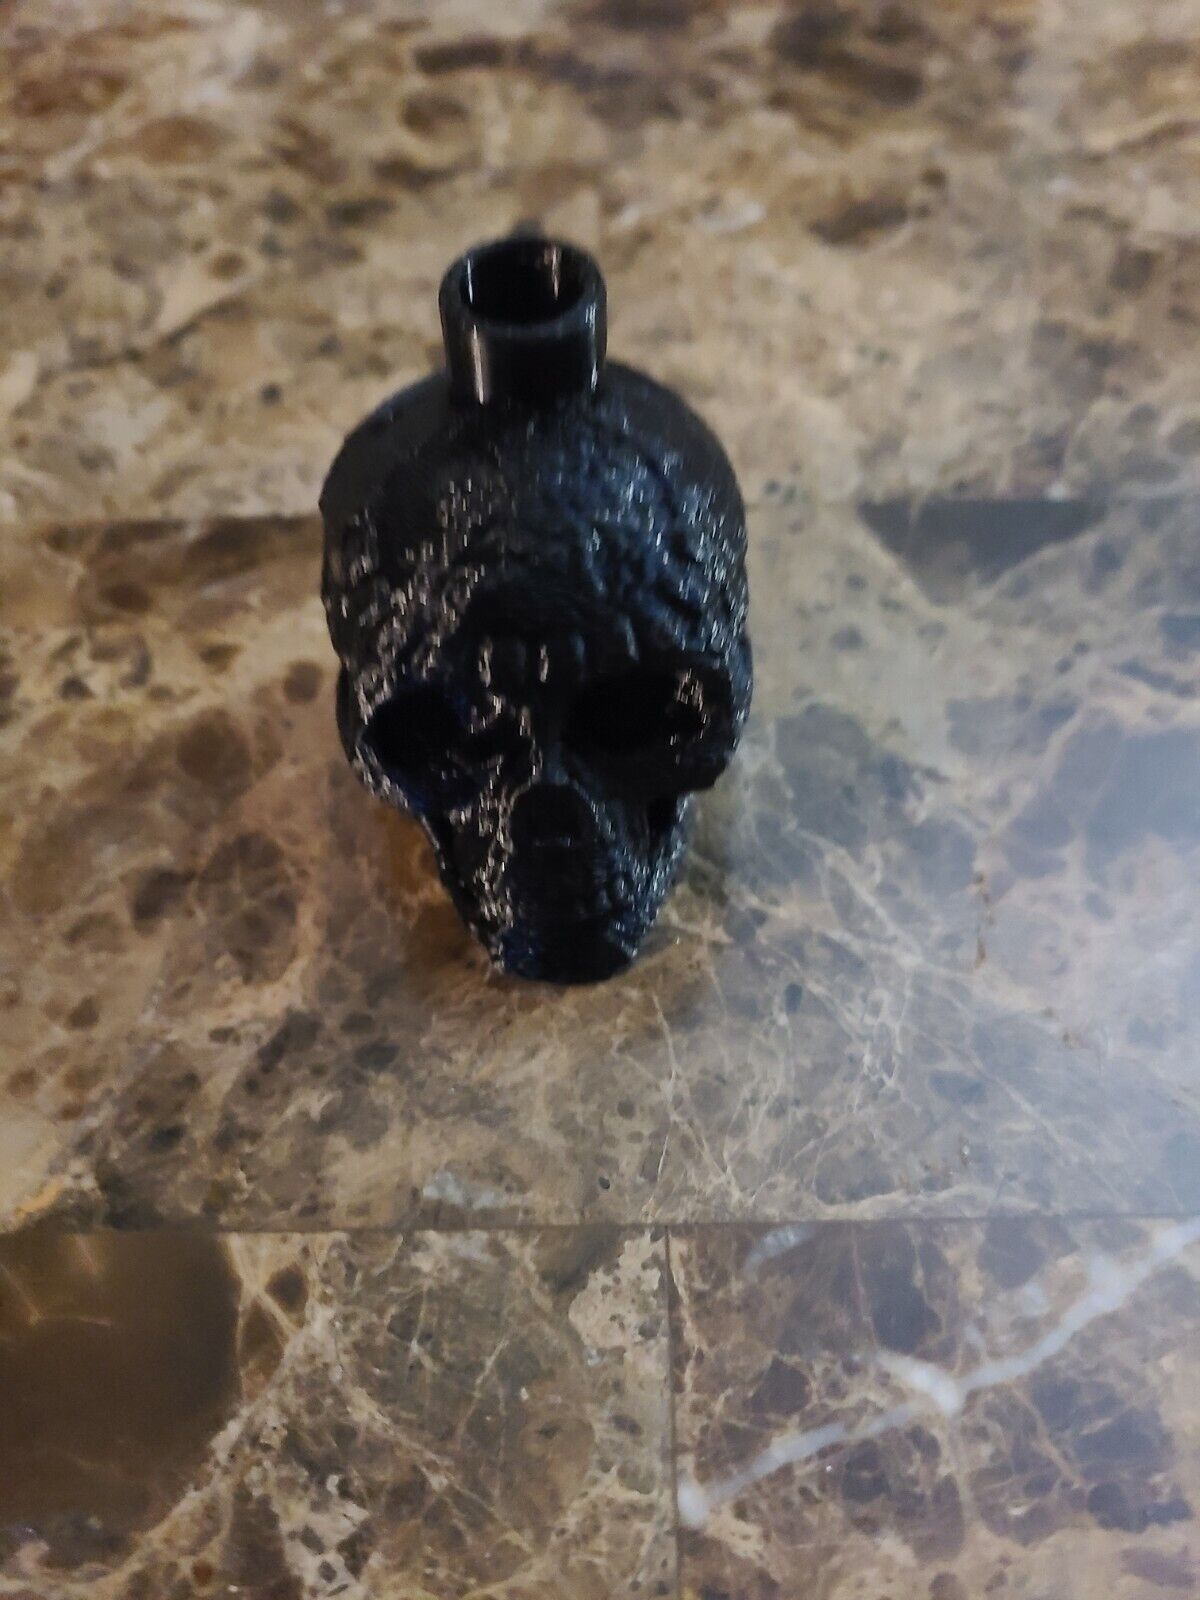 Aztec Death Whistle - 3D Printed - Very Loud 